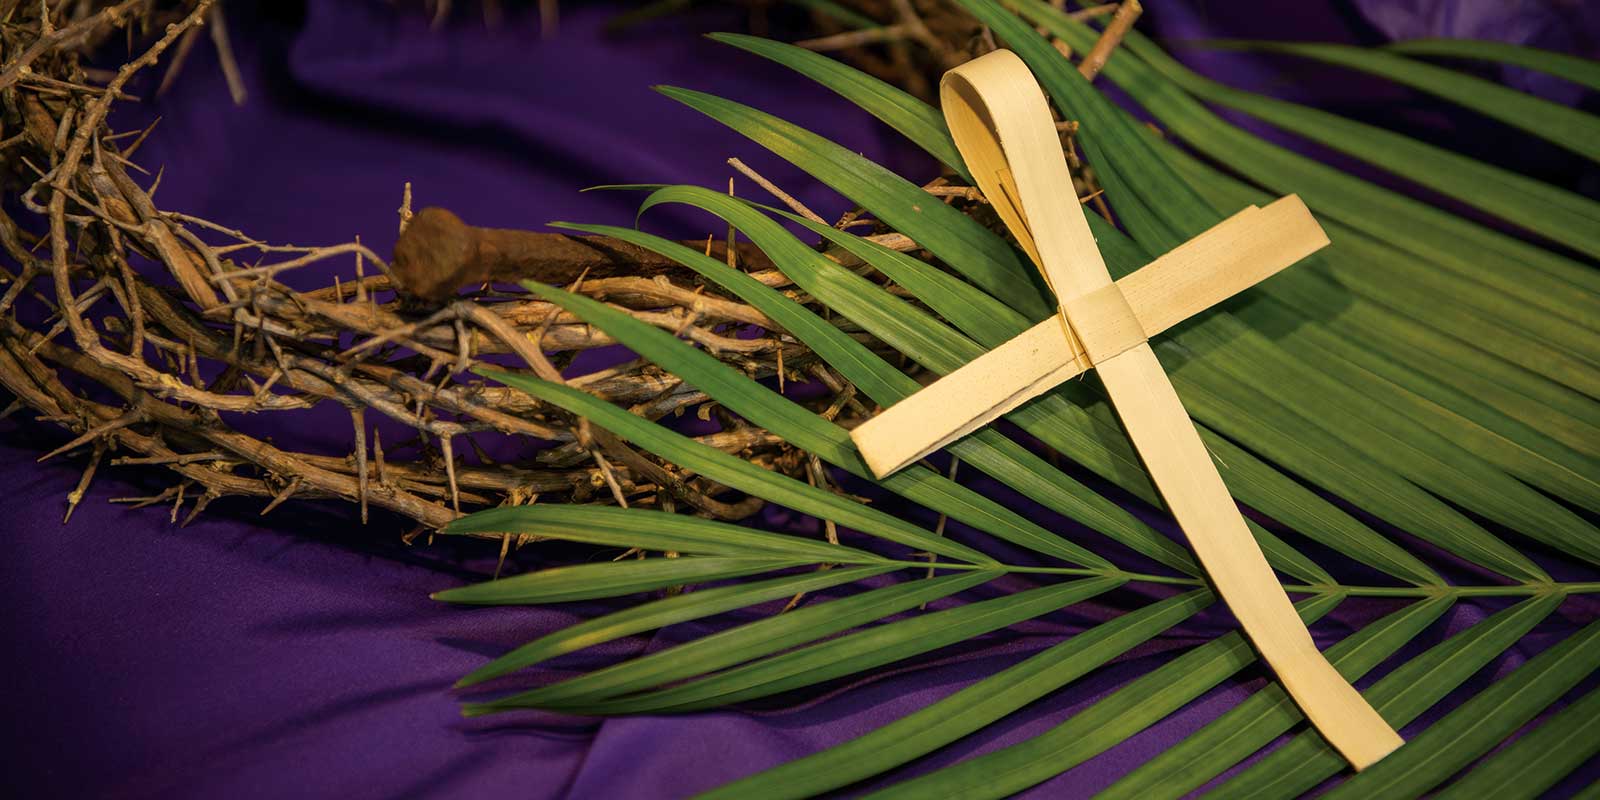 Crown of thorns, green palms leaves, and a cross made of a palm leaf sitting on a purple cloth.